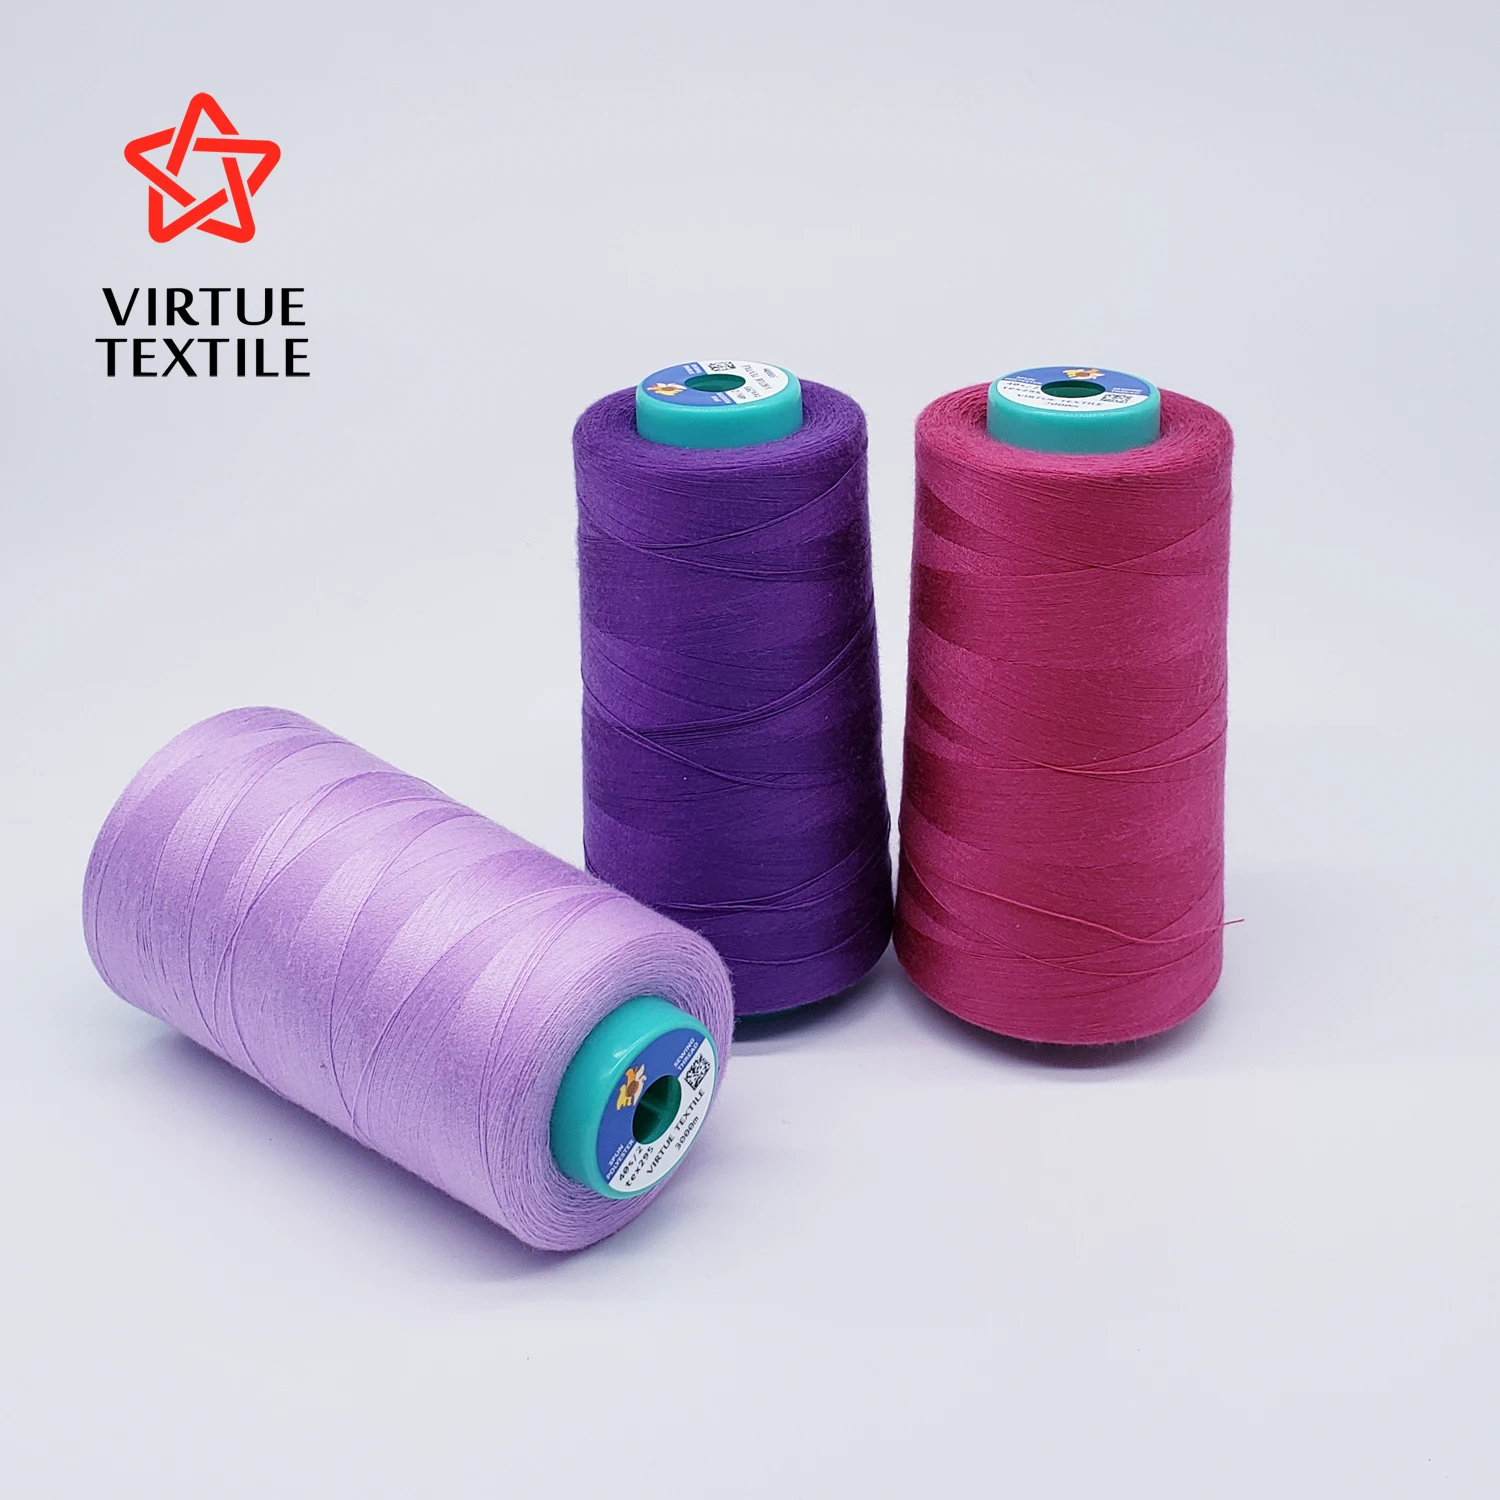 
High Quality Low price 100% Spun Polyester sewing thread 